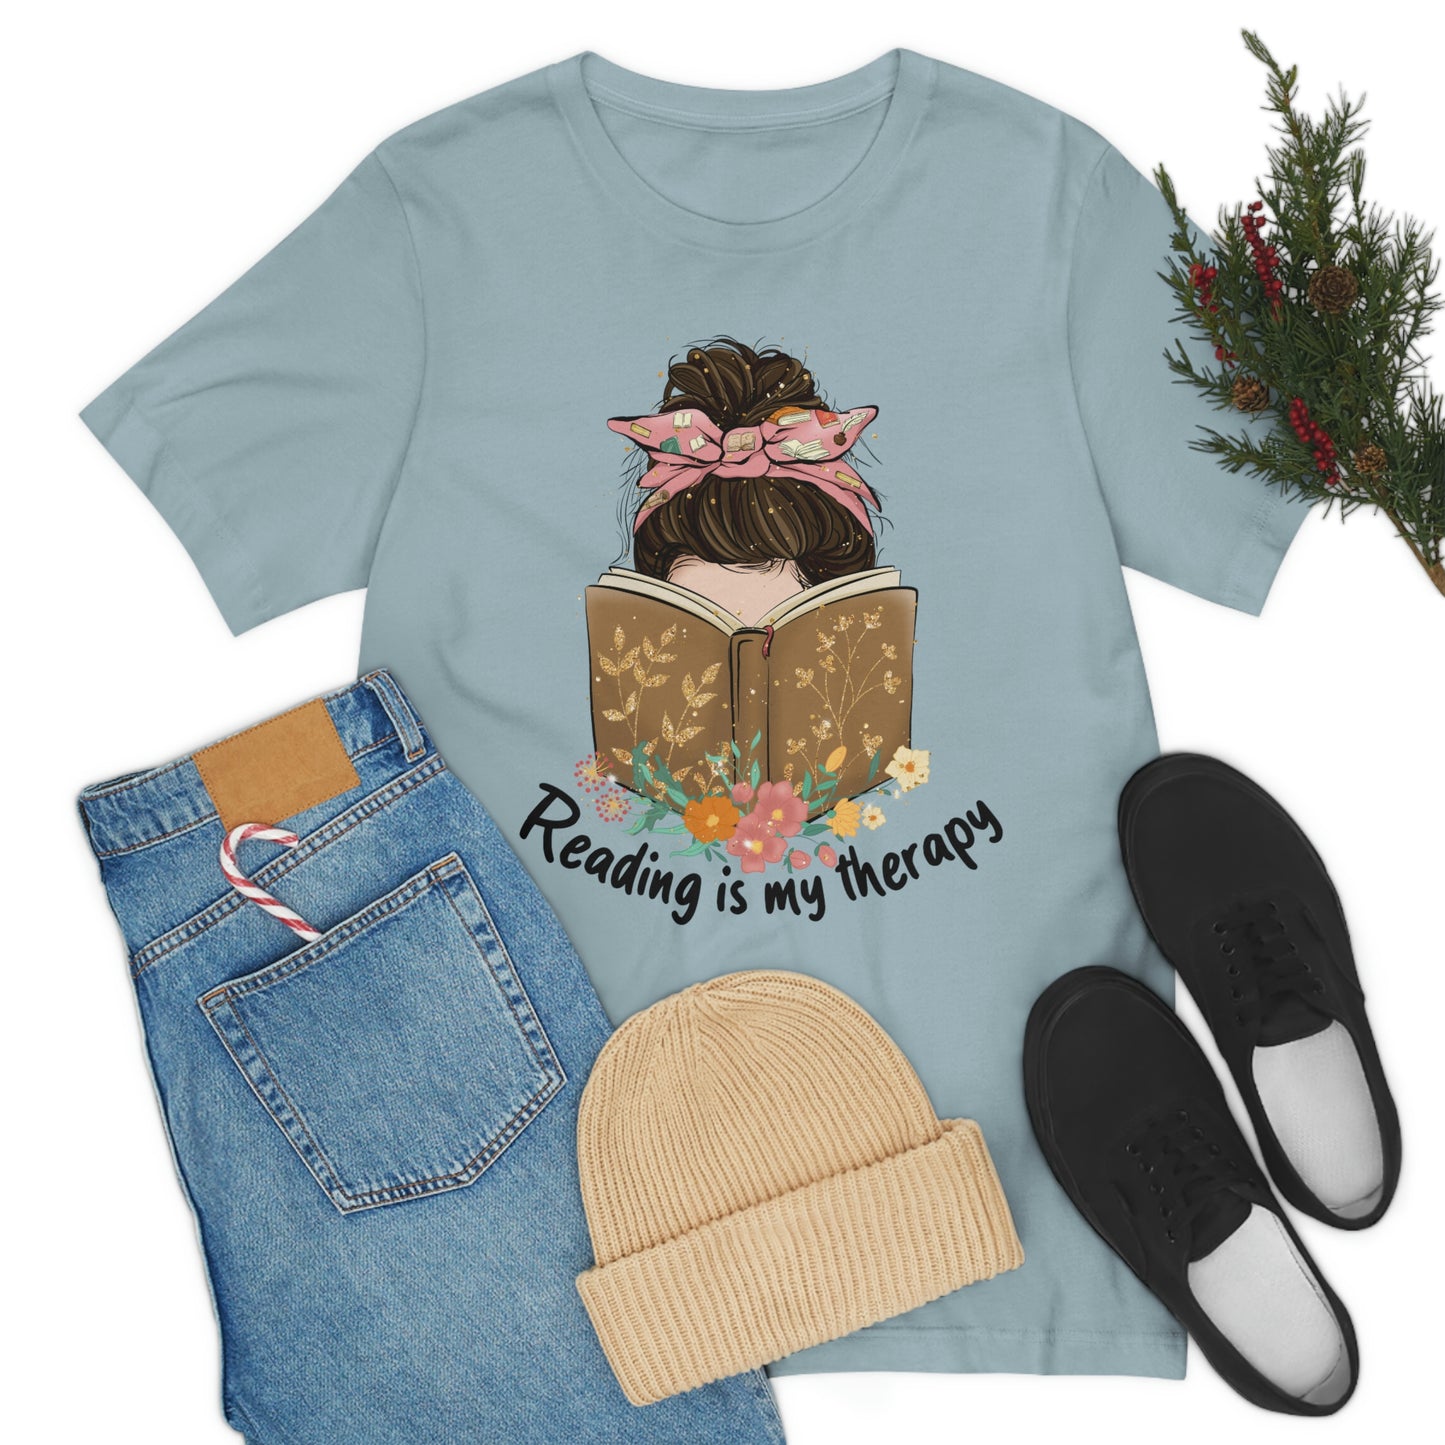 READING IS MY THERAPY T-shirt Unisex Jersey Short Sleeve Tee